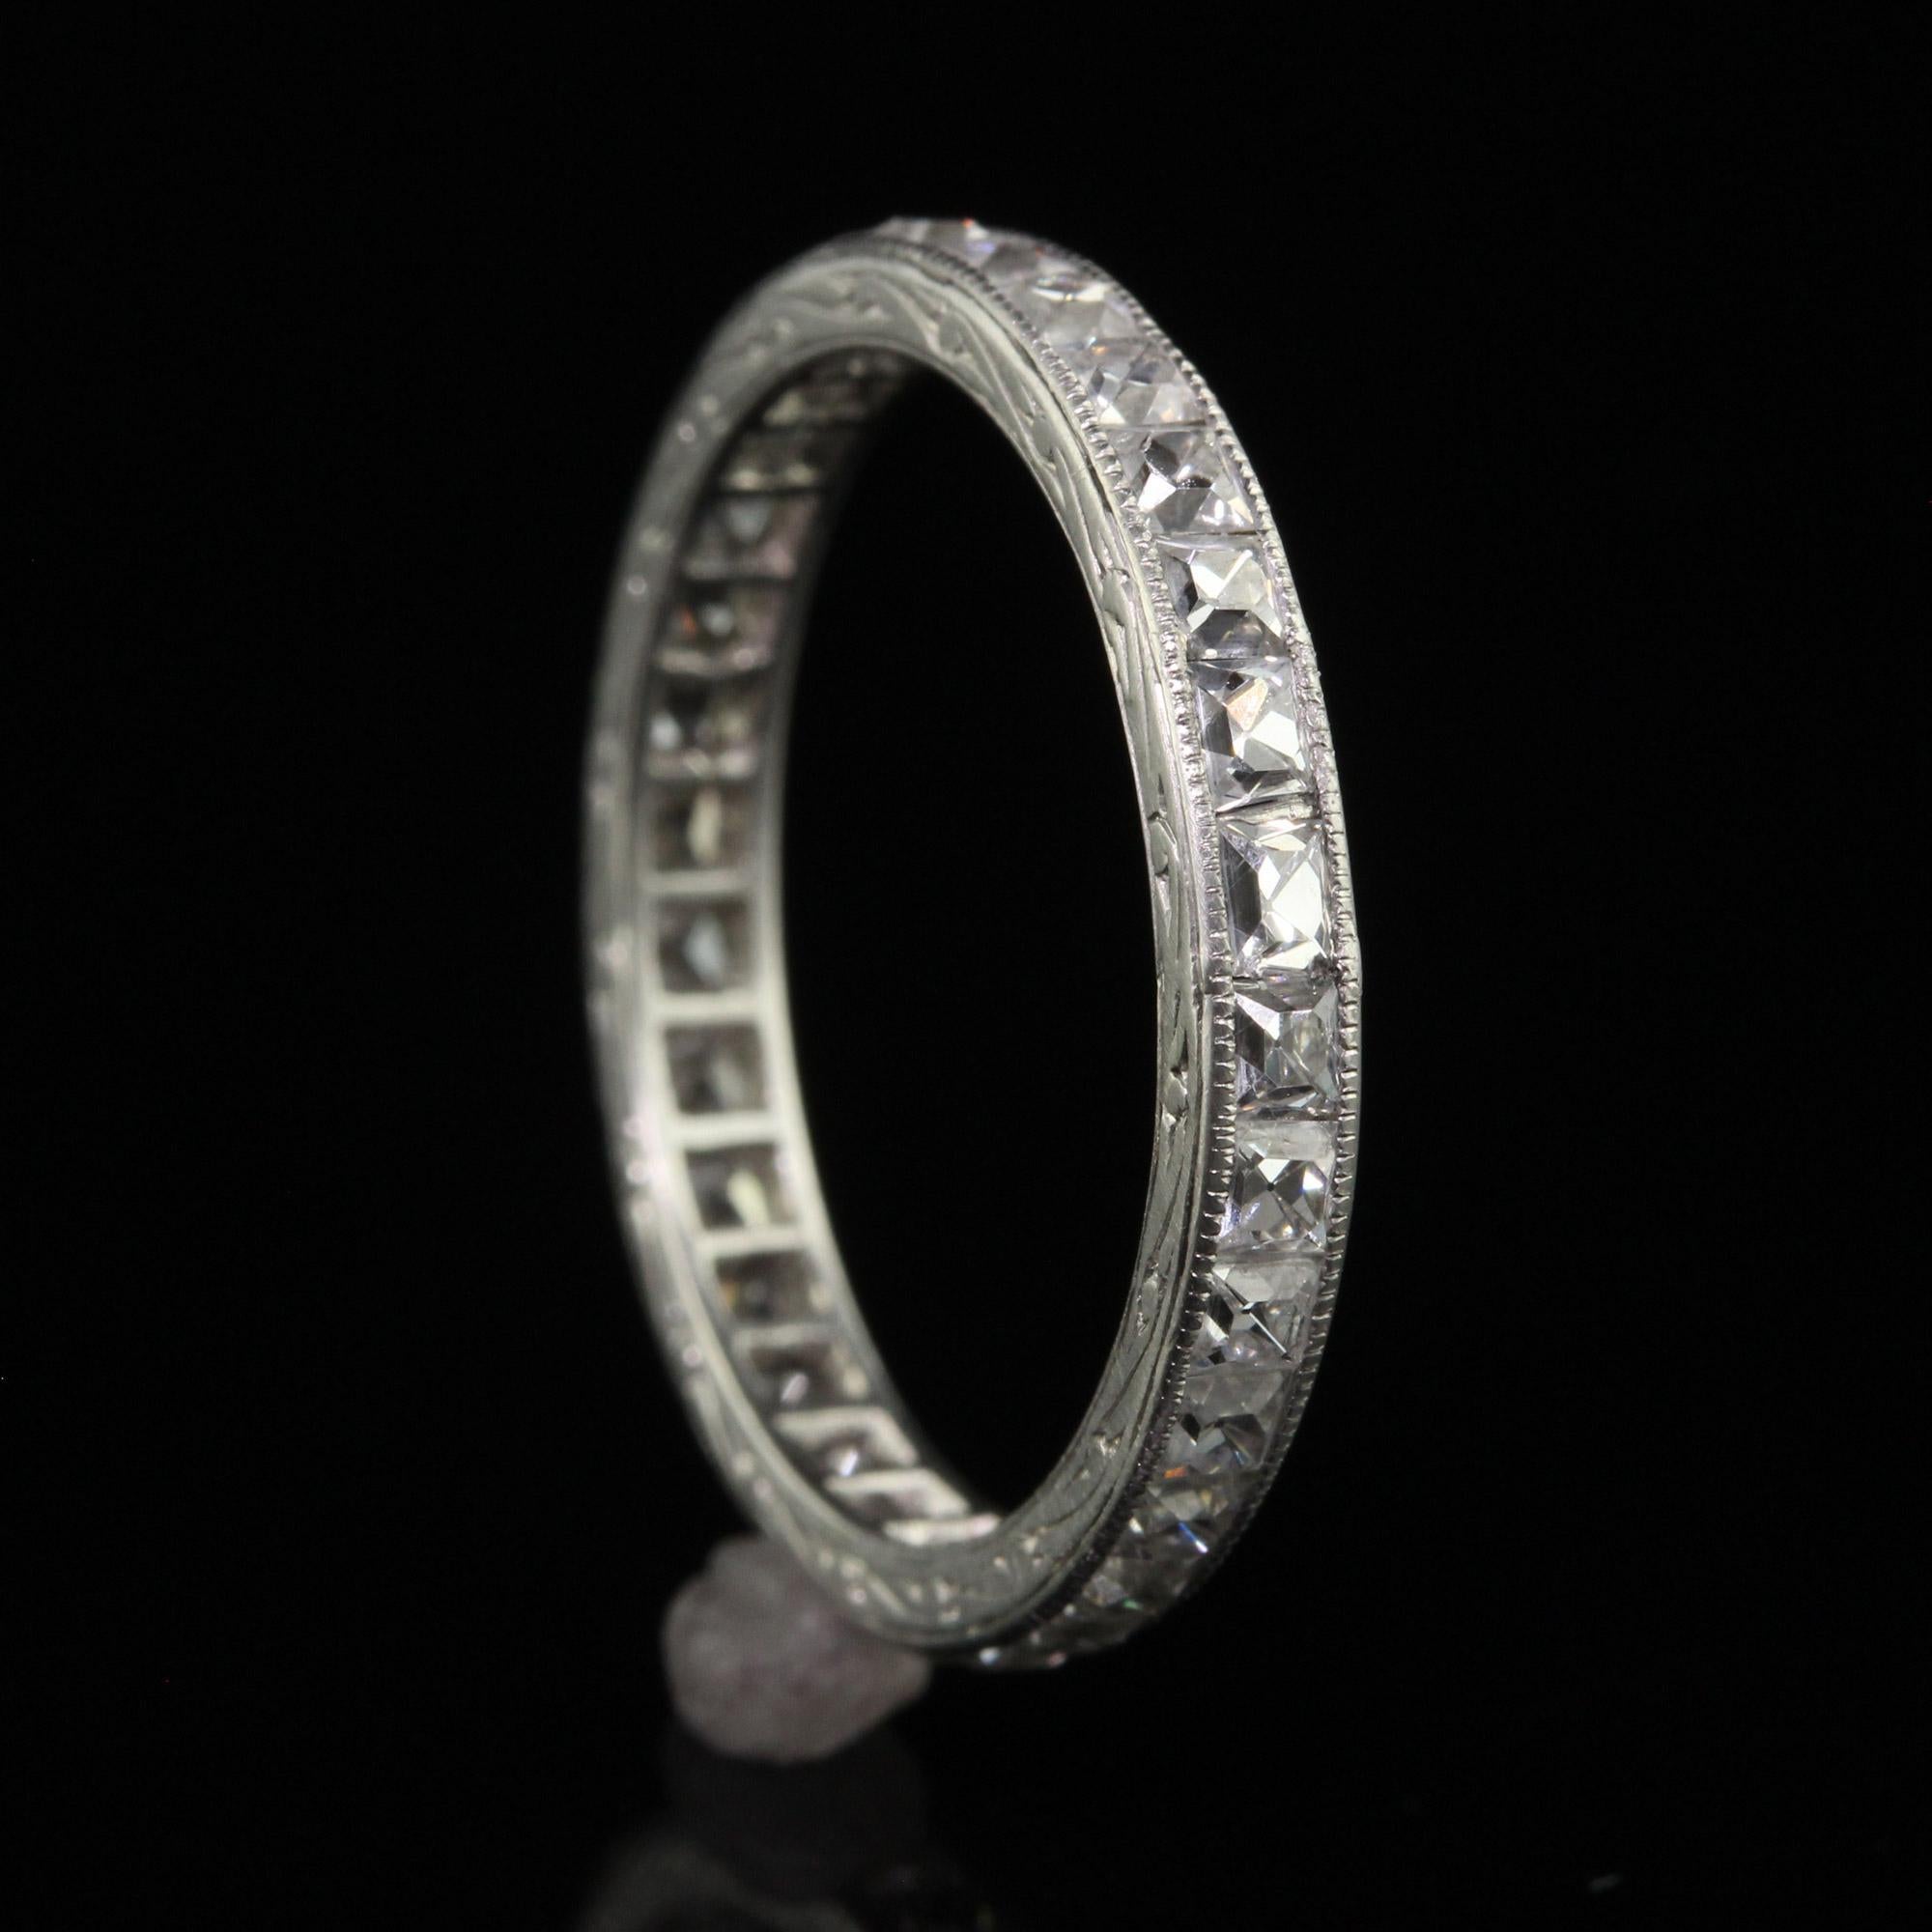 Antique Edwardian Platinum French Cut Diamond Engraved Eternity Ring - Size 7 For Sale 3